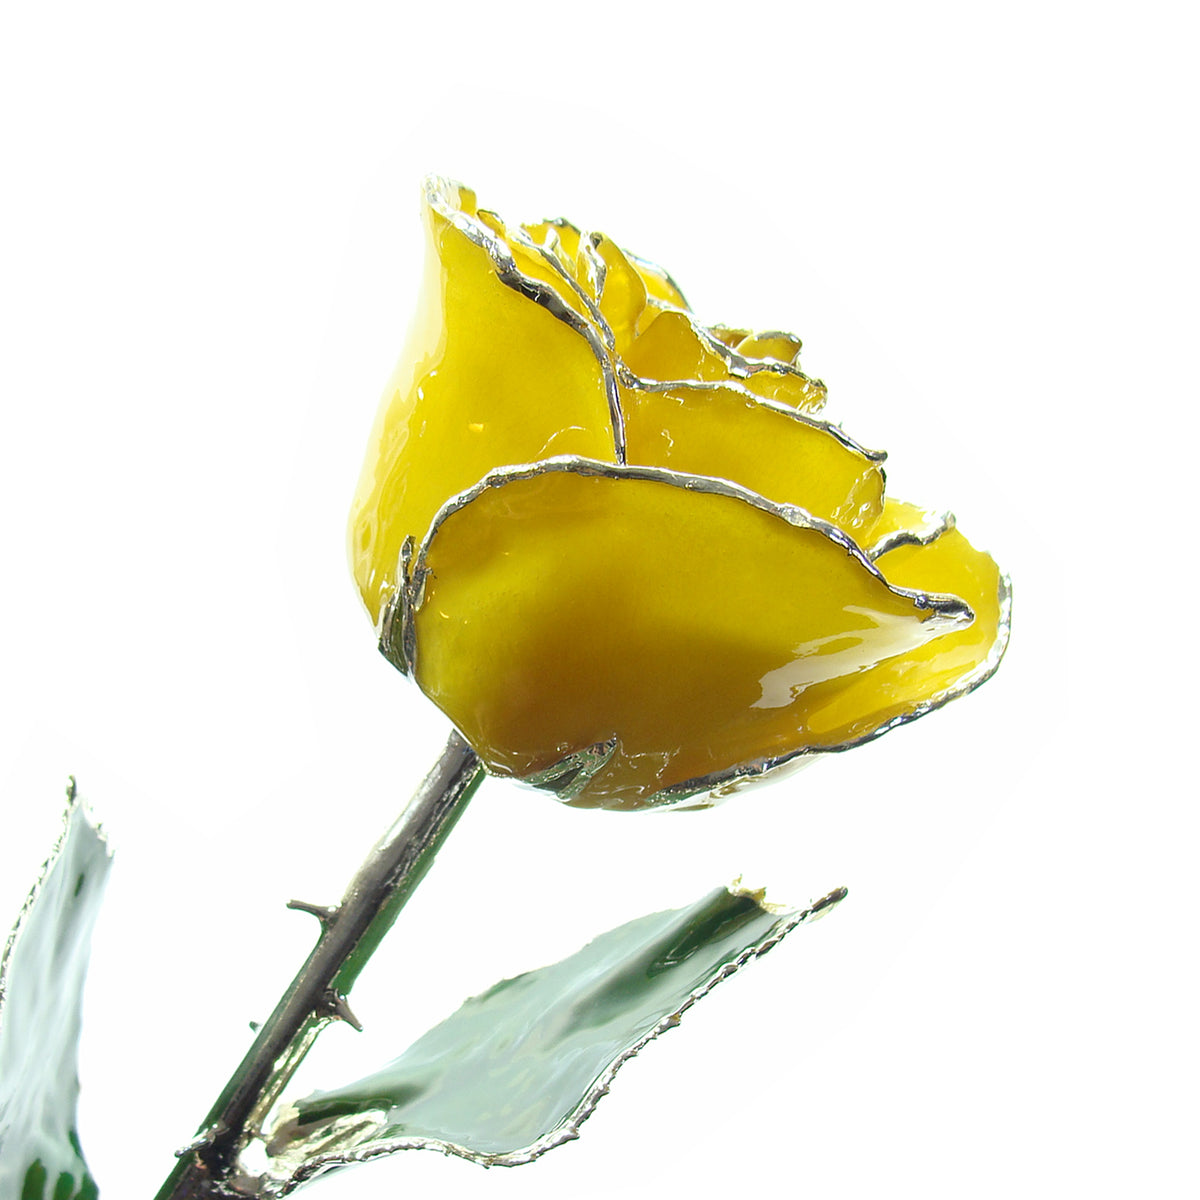 Silver Trimmed Forever Rose with Yellow Petals. View of Stem, Leaves, and Rose Petals and Showing Detail of Silver Trim